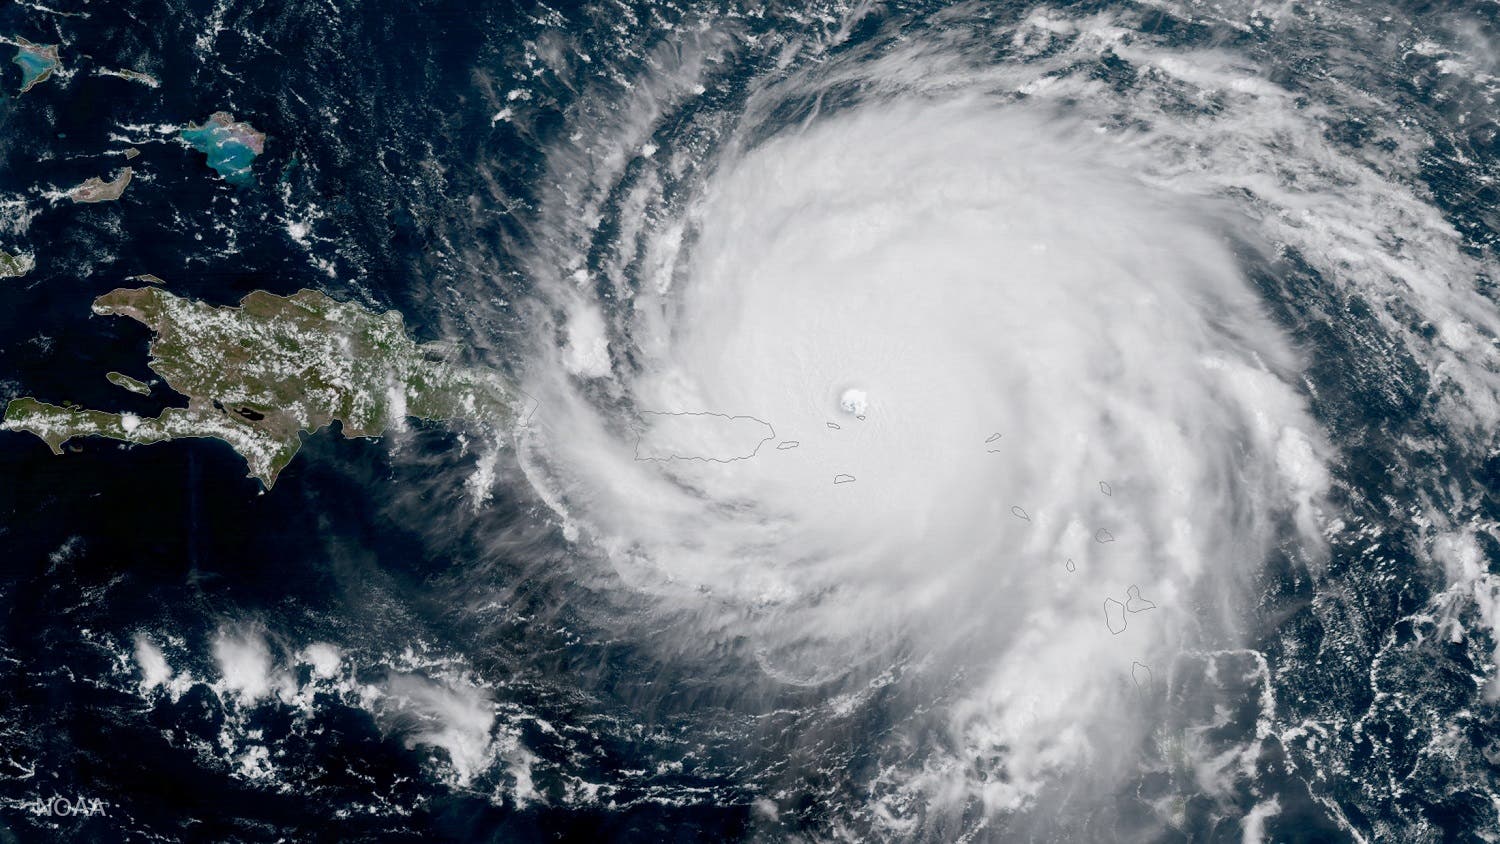 Hurricane Irma is seen approaching Puerto Rico in this NASA’s GOES-16 satellite image taken at about 15:15 EDT on September 6, 2017. (Reuters)